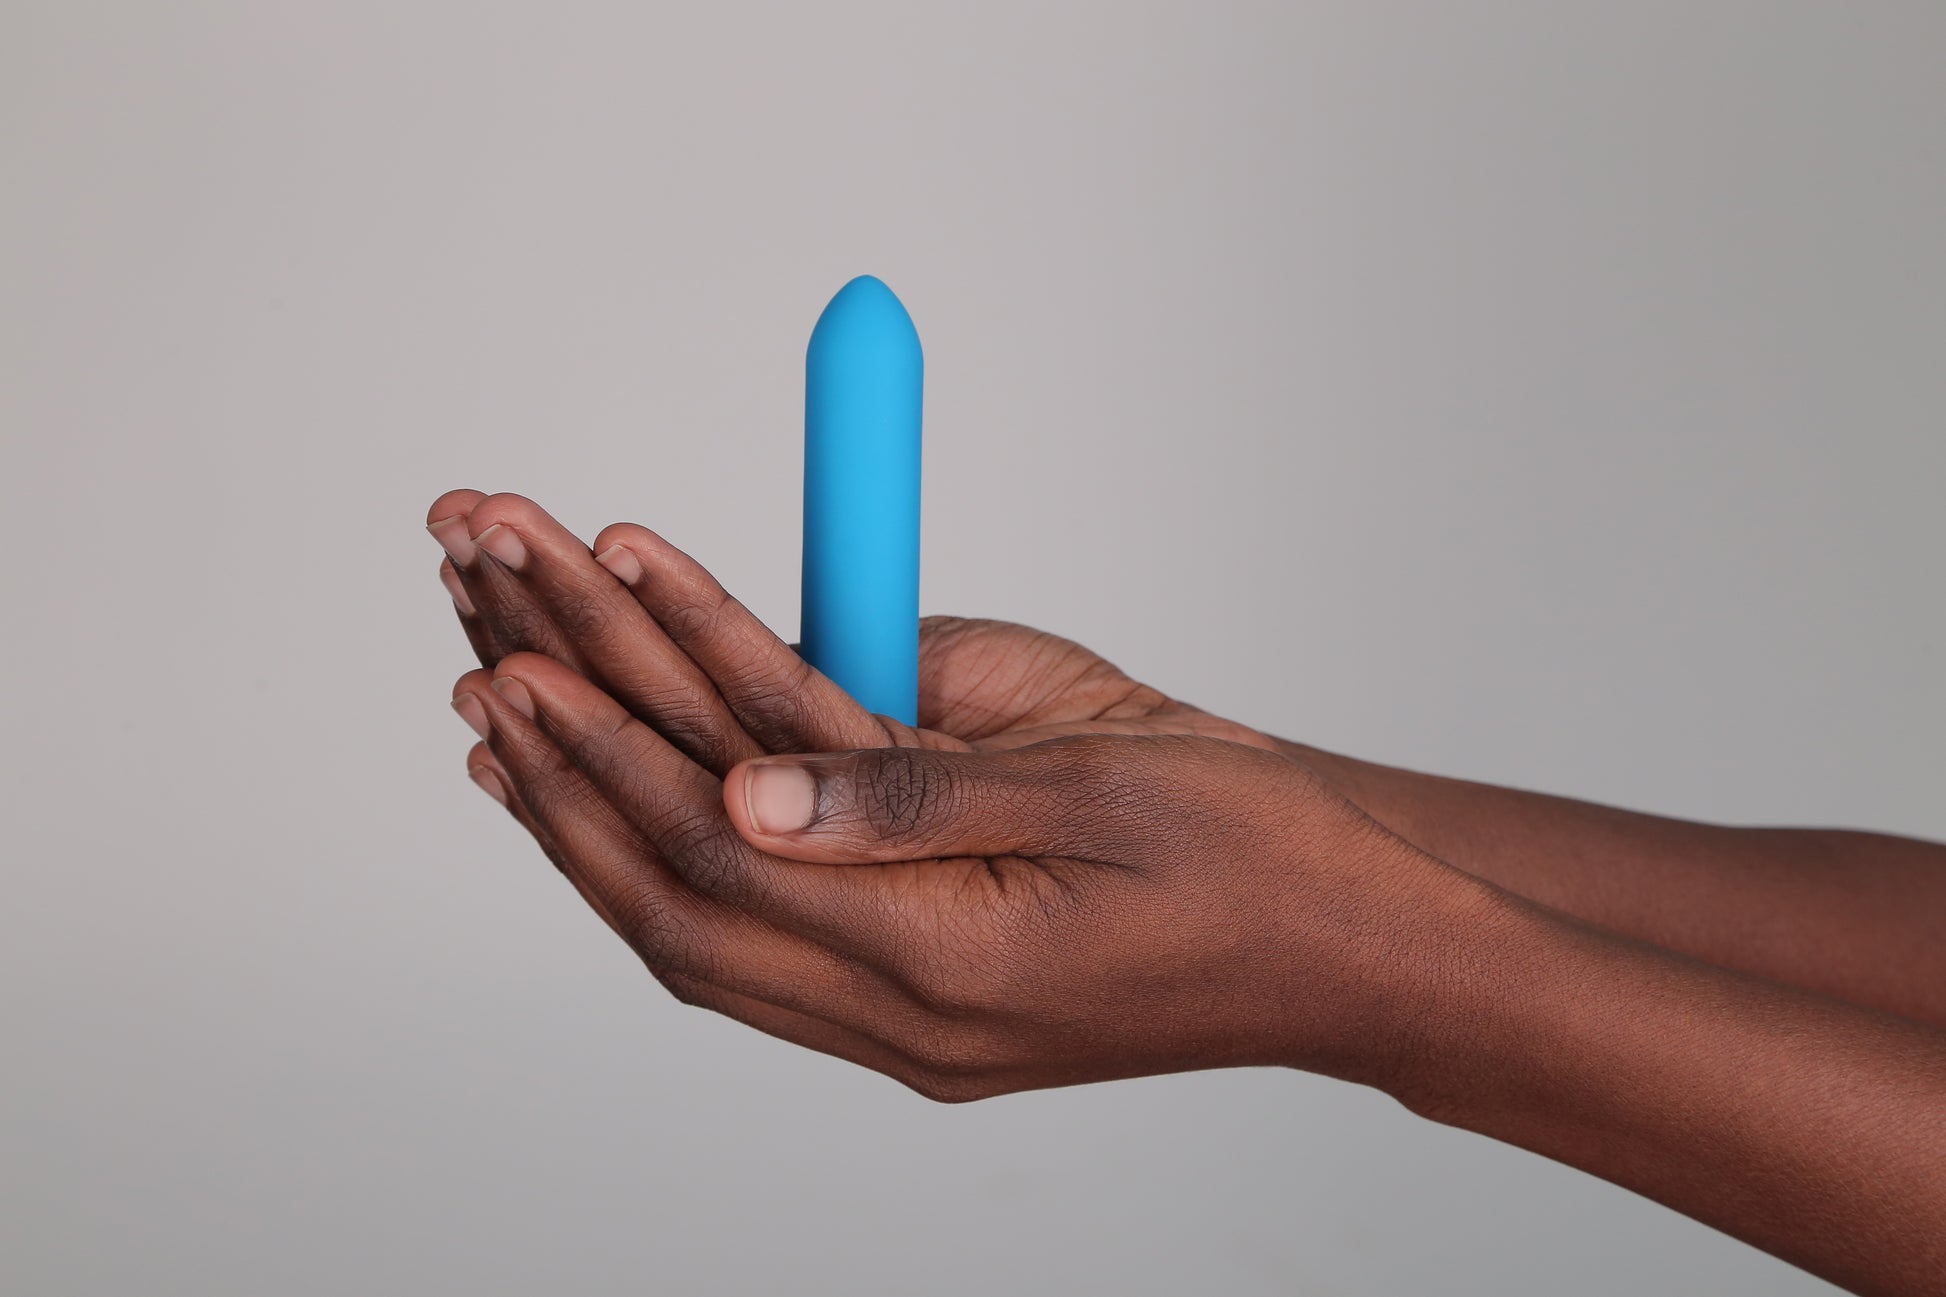 Hand holding Classic Bullet Vibrator in teal